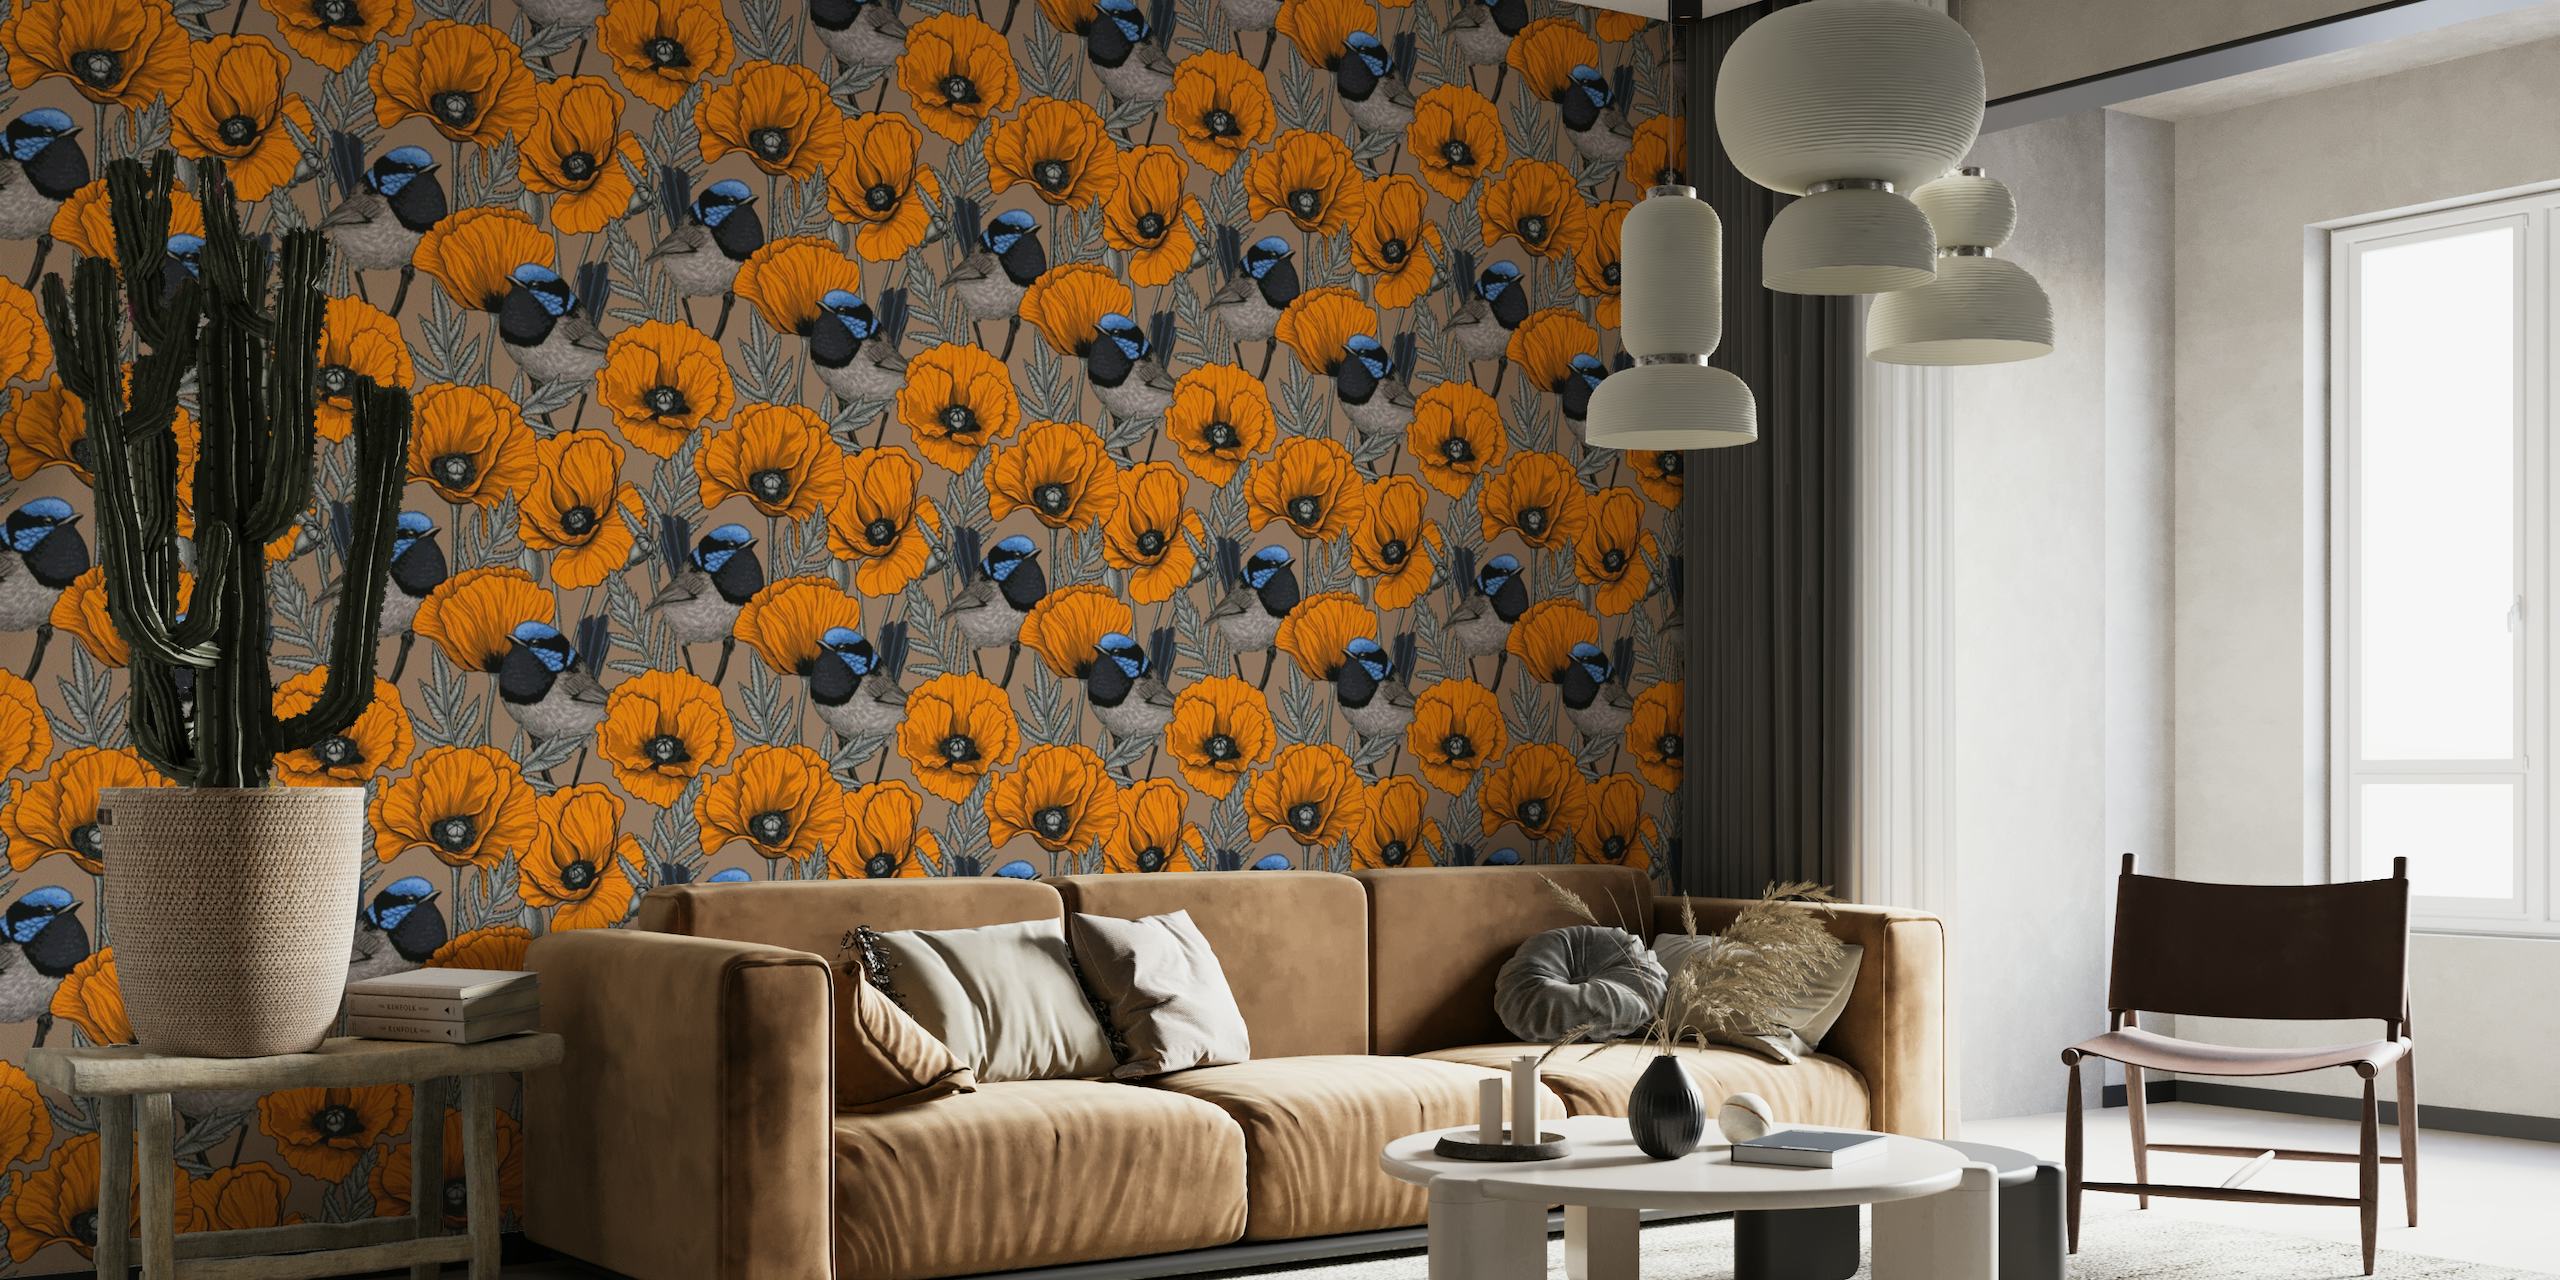 Fairy wrens and orange poppies on mocha brown wallpaper